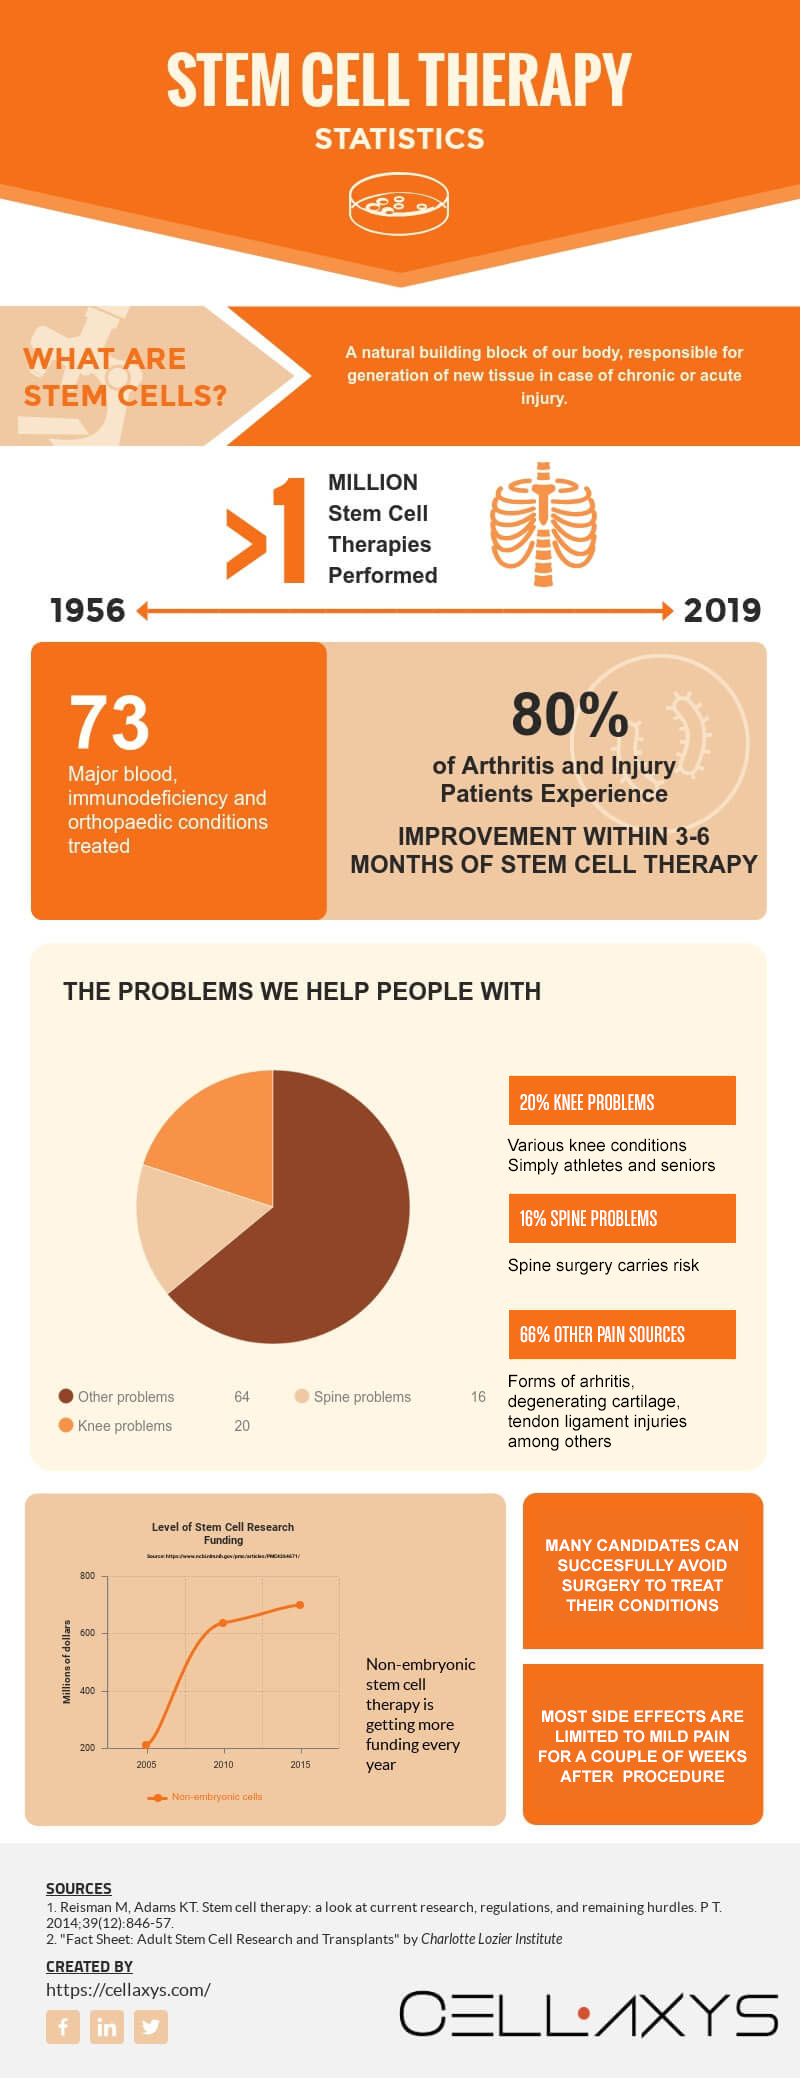 Stem Cell Therapy Statistics